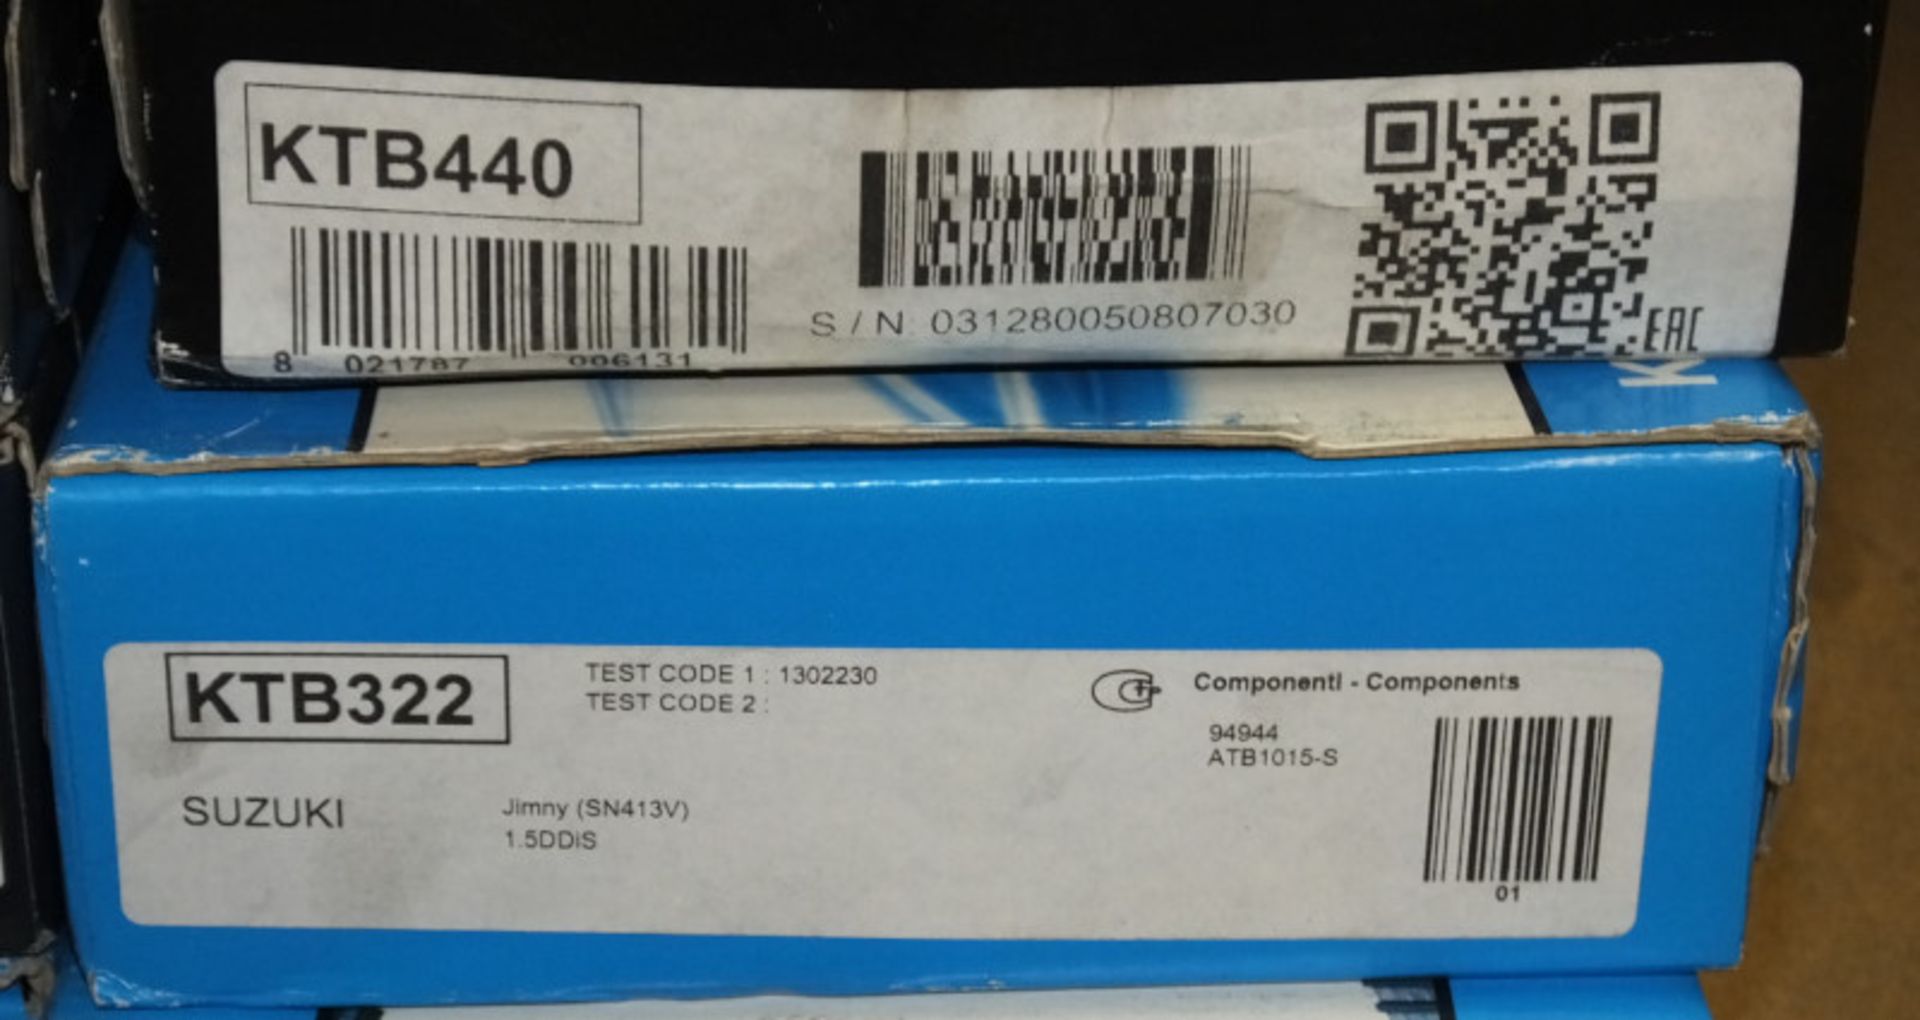 6x Dayco Timing Belt Kits - Please see pictures for model numbers - Image 4 of 4